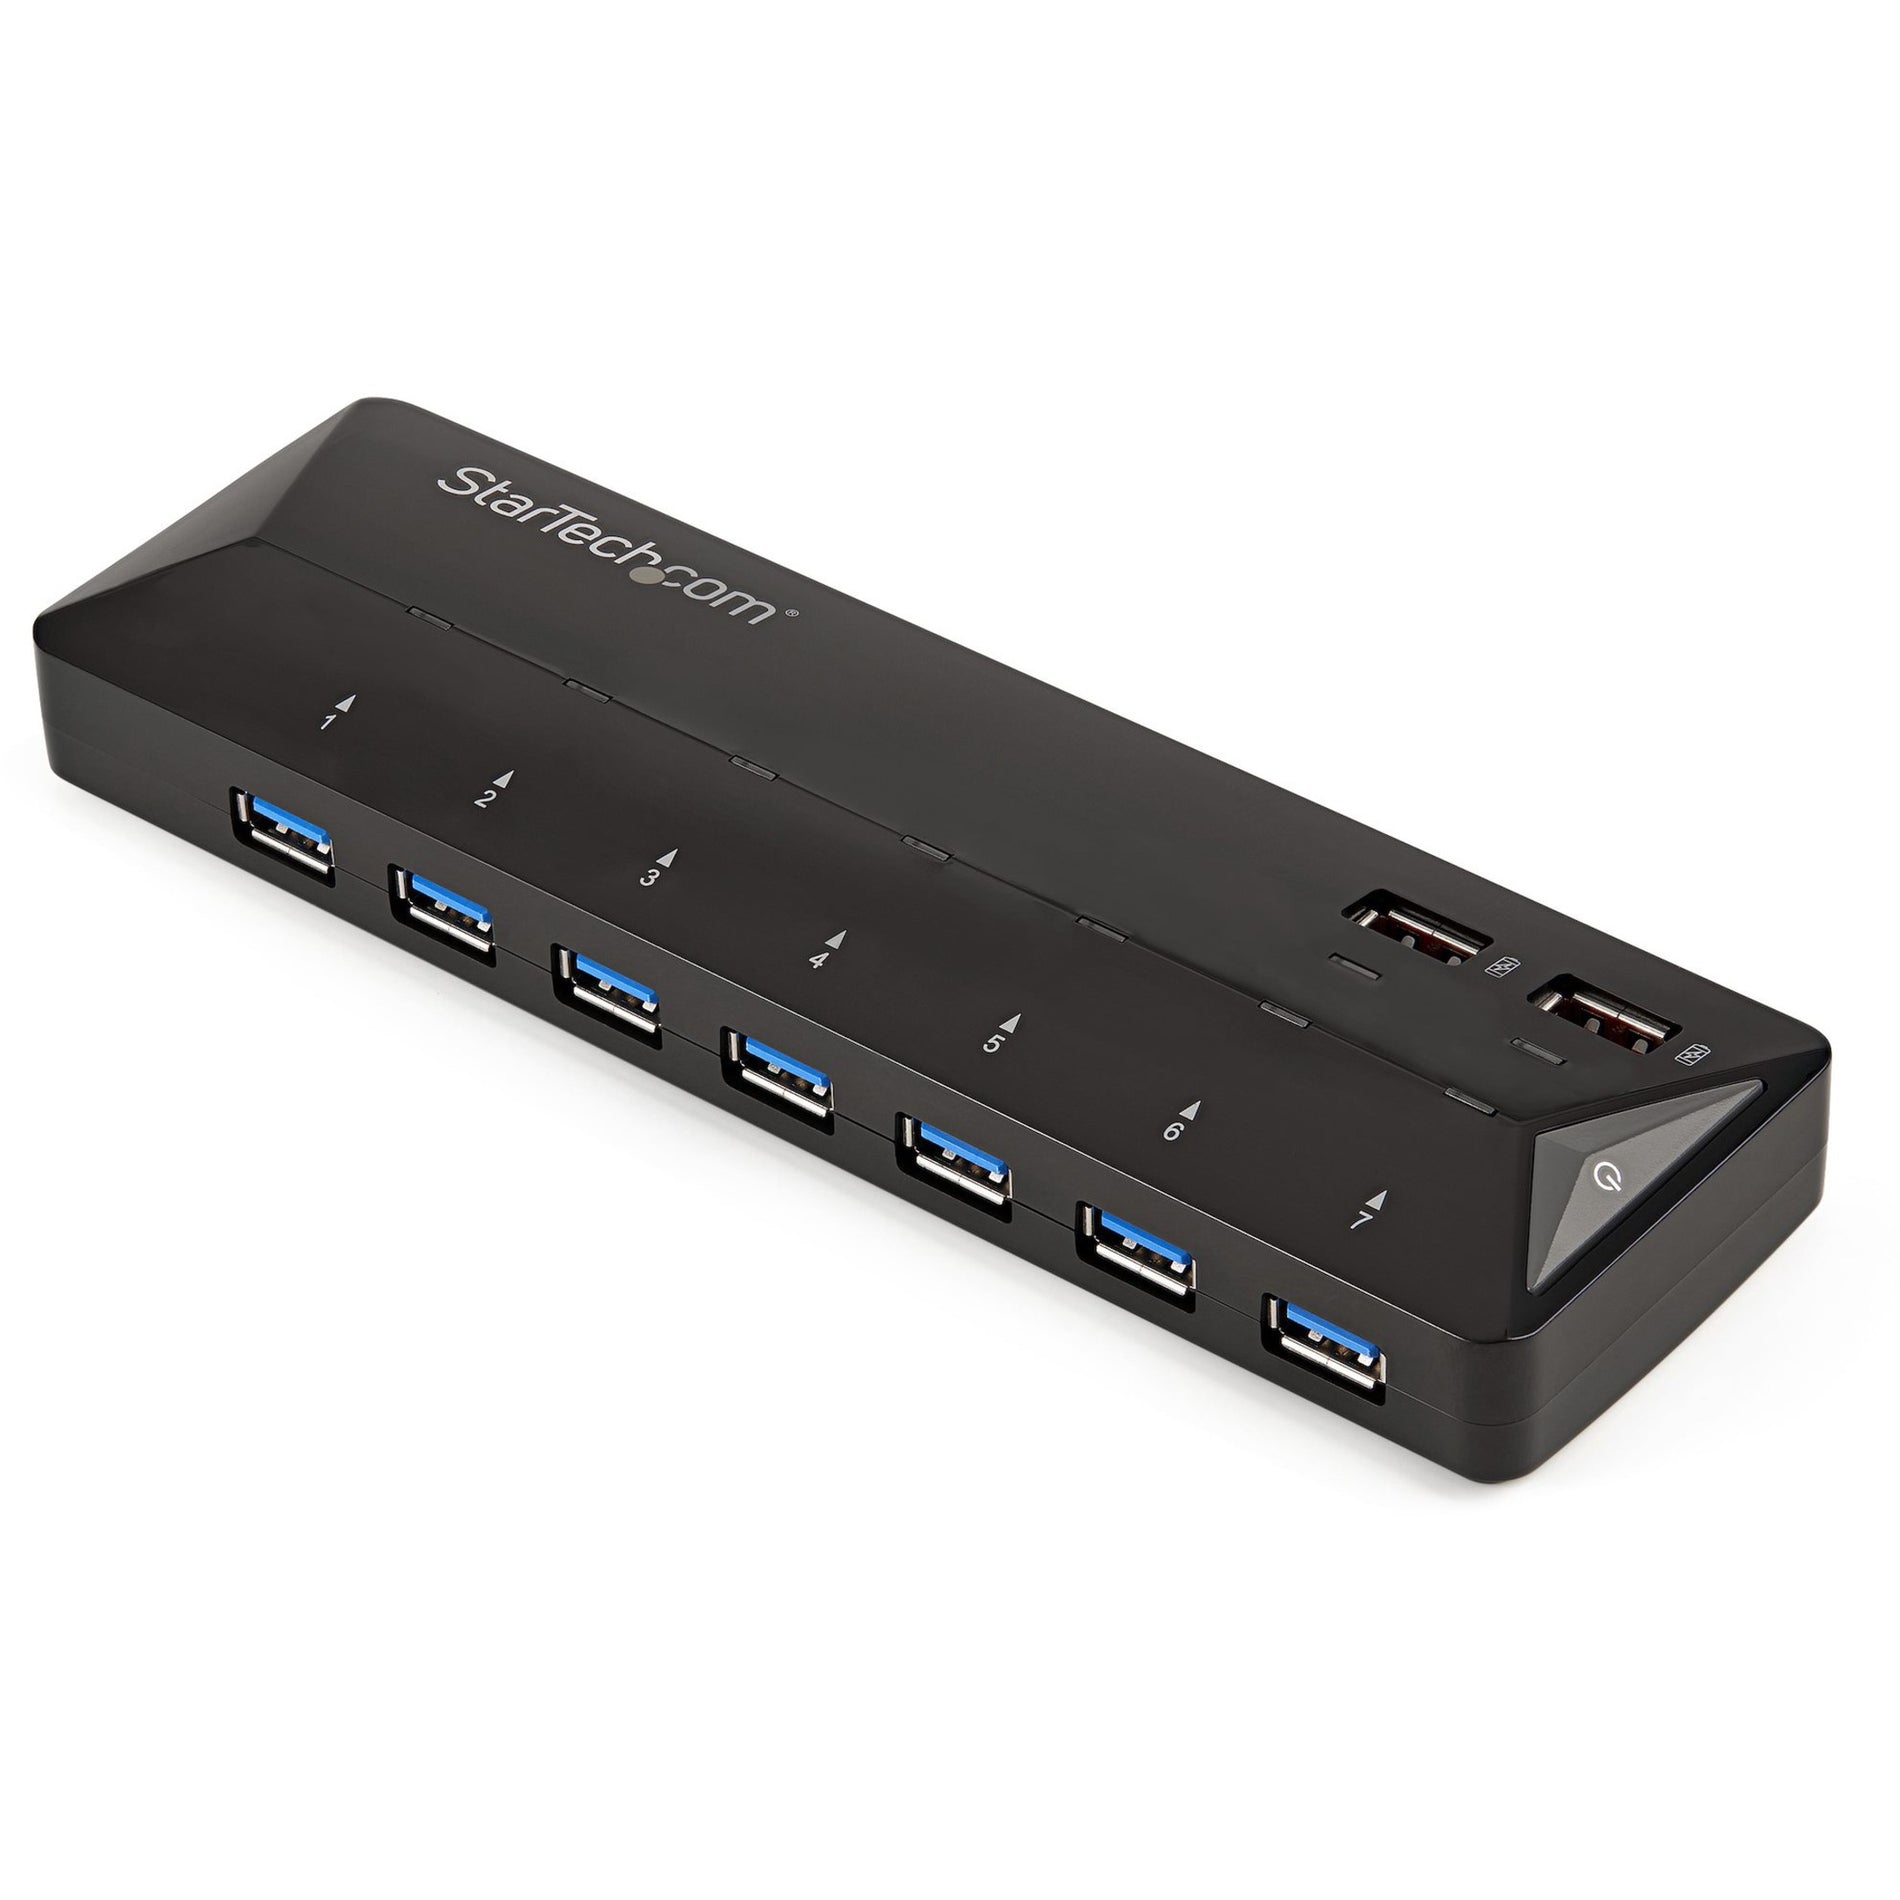 StarTech.com ST93007U2C 7-Port USB 3.0 Hub plus Dedicated Charging Ports, Fast-Charging Station for Desktop - Expand USB Connectivity and Charge Devices